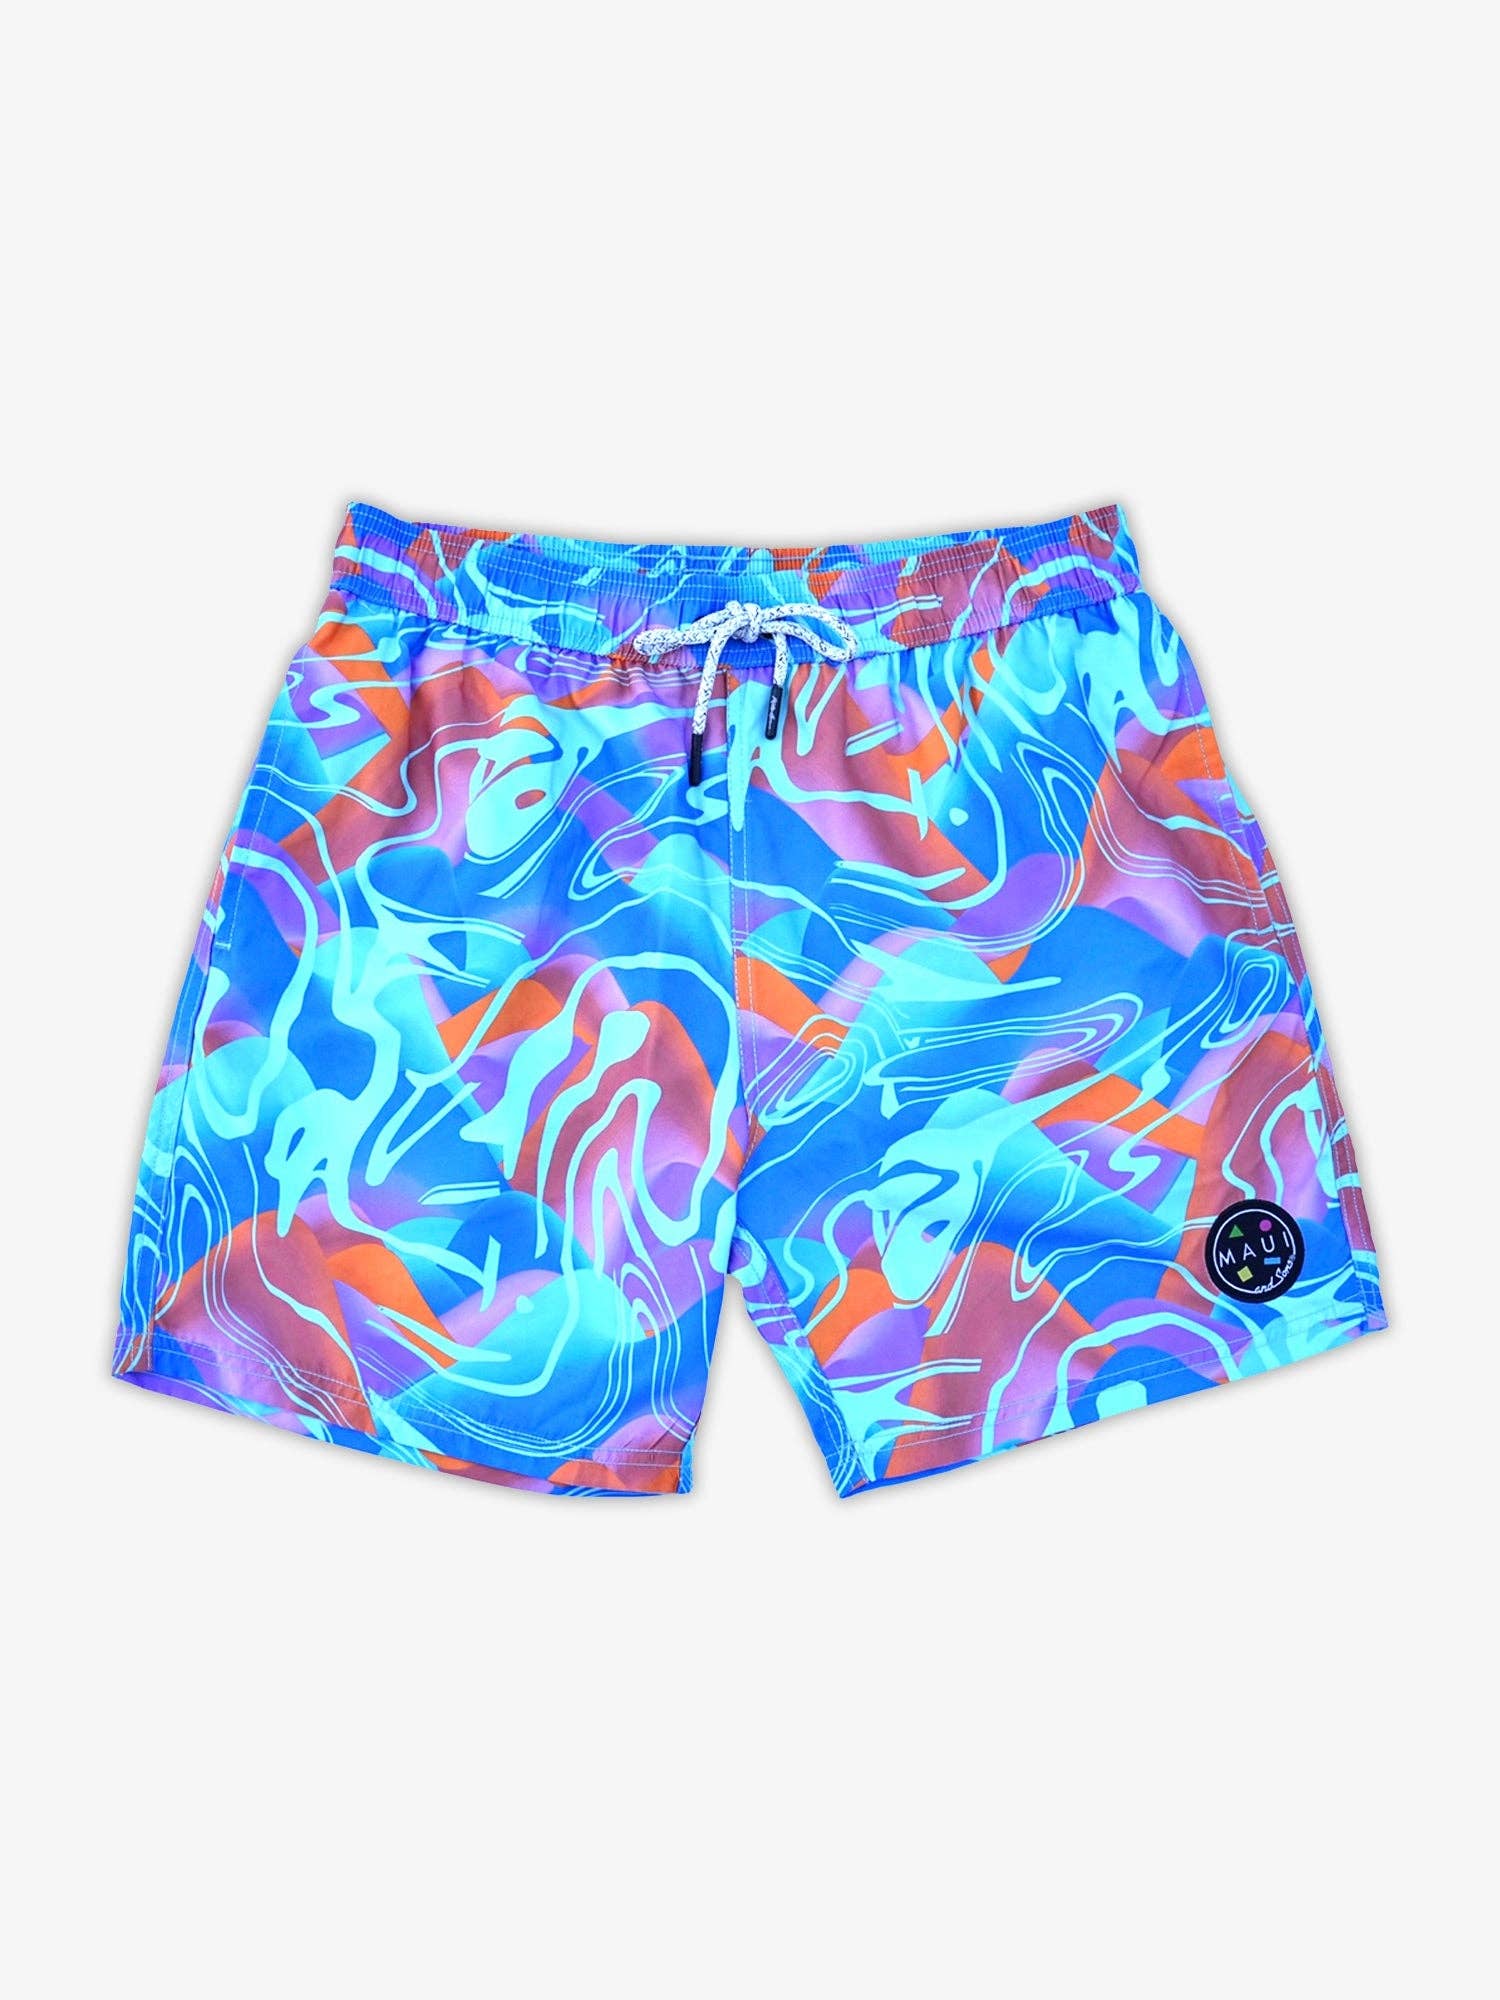 Psychedelic Pool Shorts in Blue: M / BLUE - Rain & Hibiscus